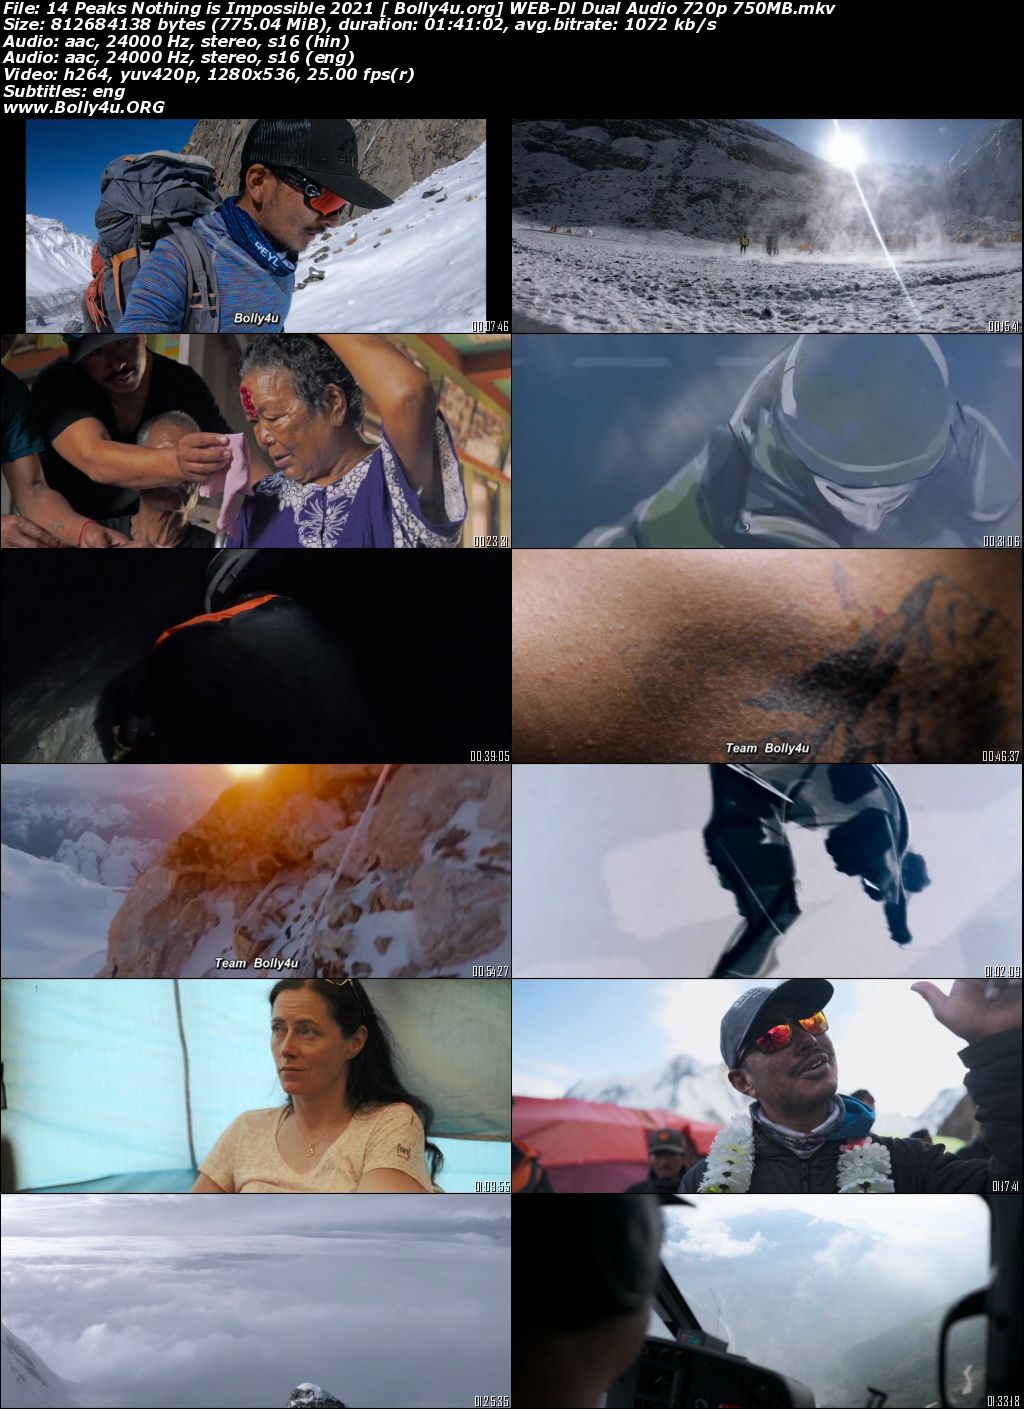 14 Peaks Nothing is Impossible 2021 WEB-DL 750Mb Hindi Dual Audio 720p Download